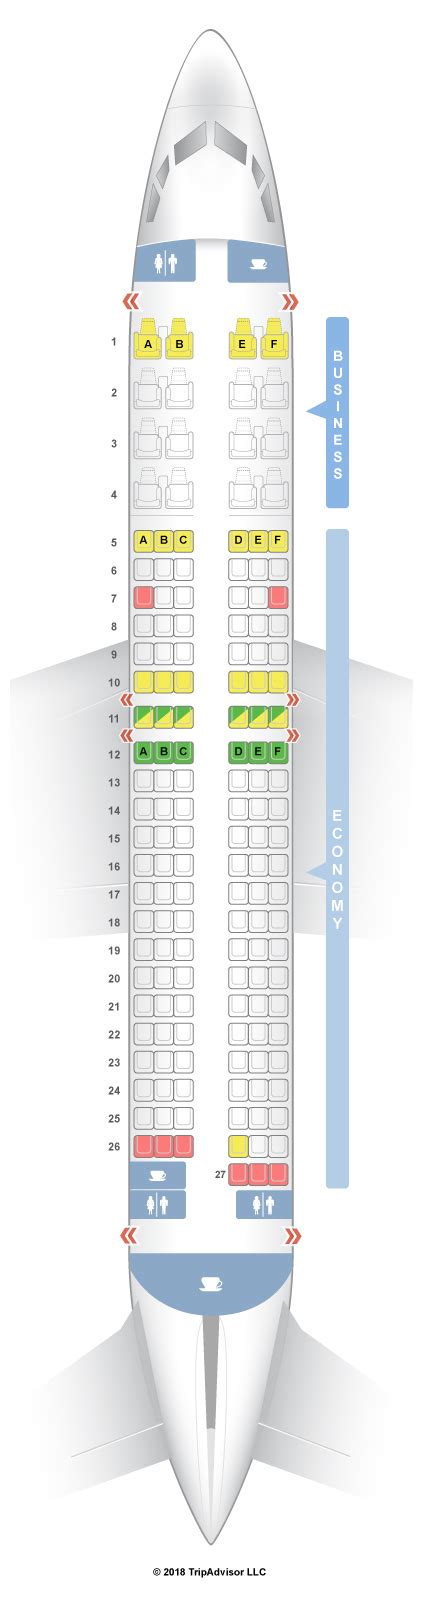 Turkish Airlines Boeing 737 800 Seat Map My XXX Hot Girl